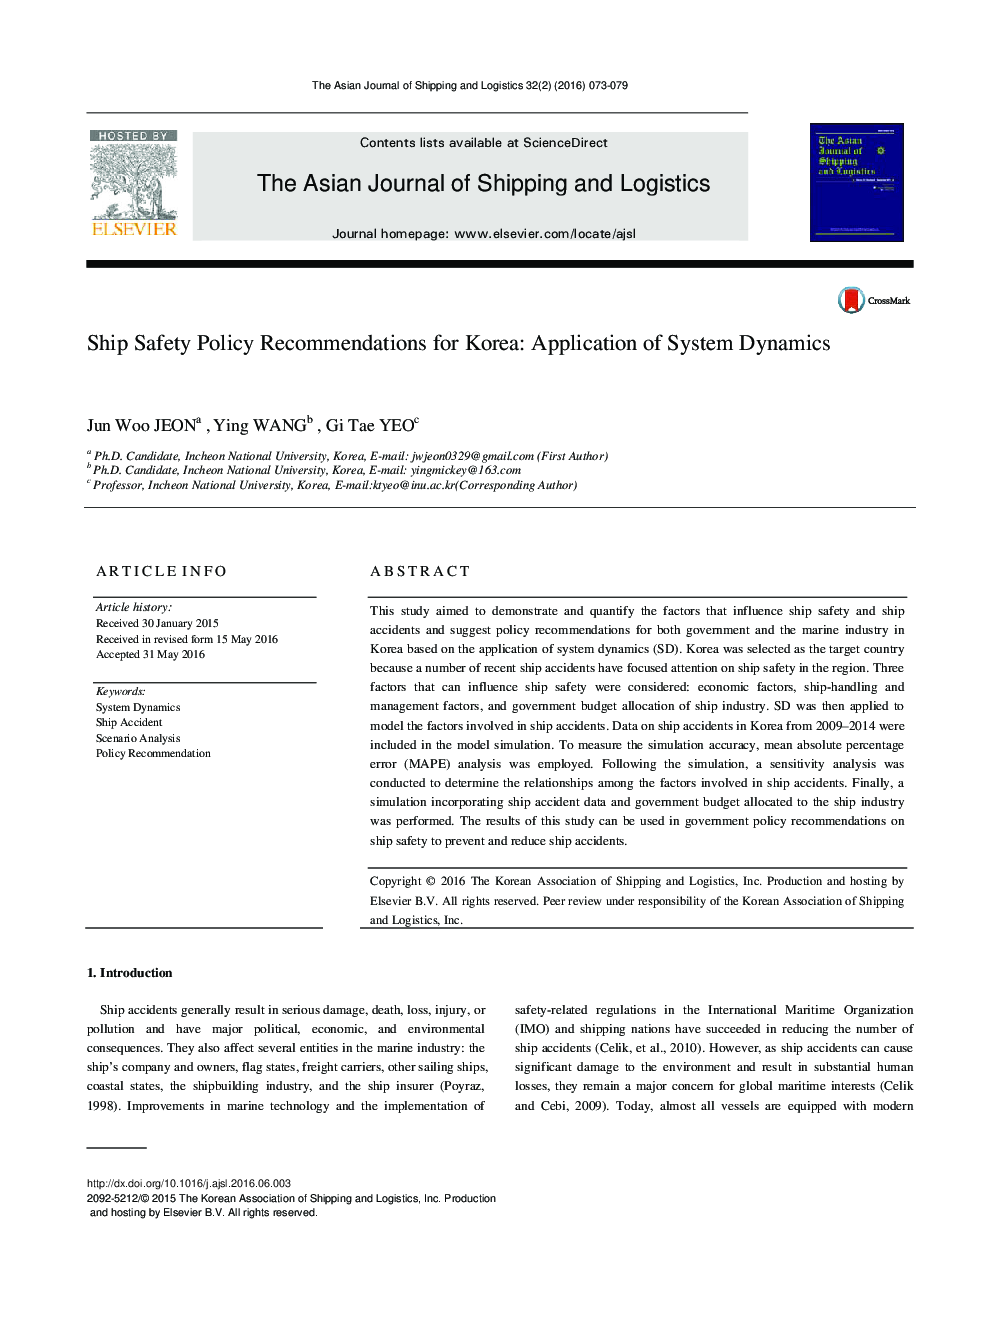 Ship Safety Policy Recommendations for Korea: Application of System Dynamics 